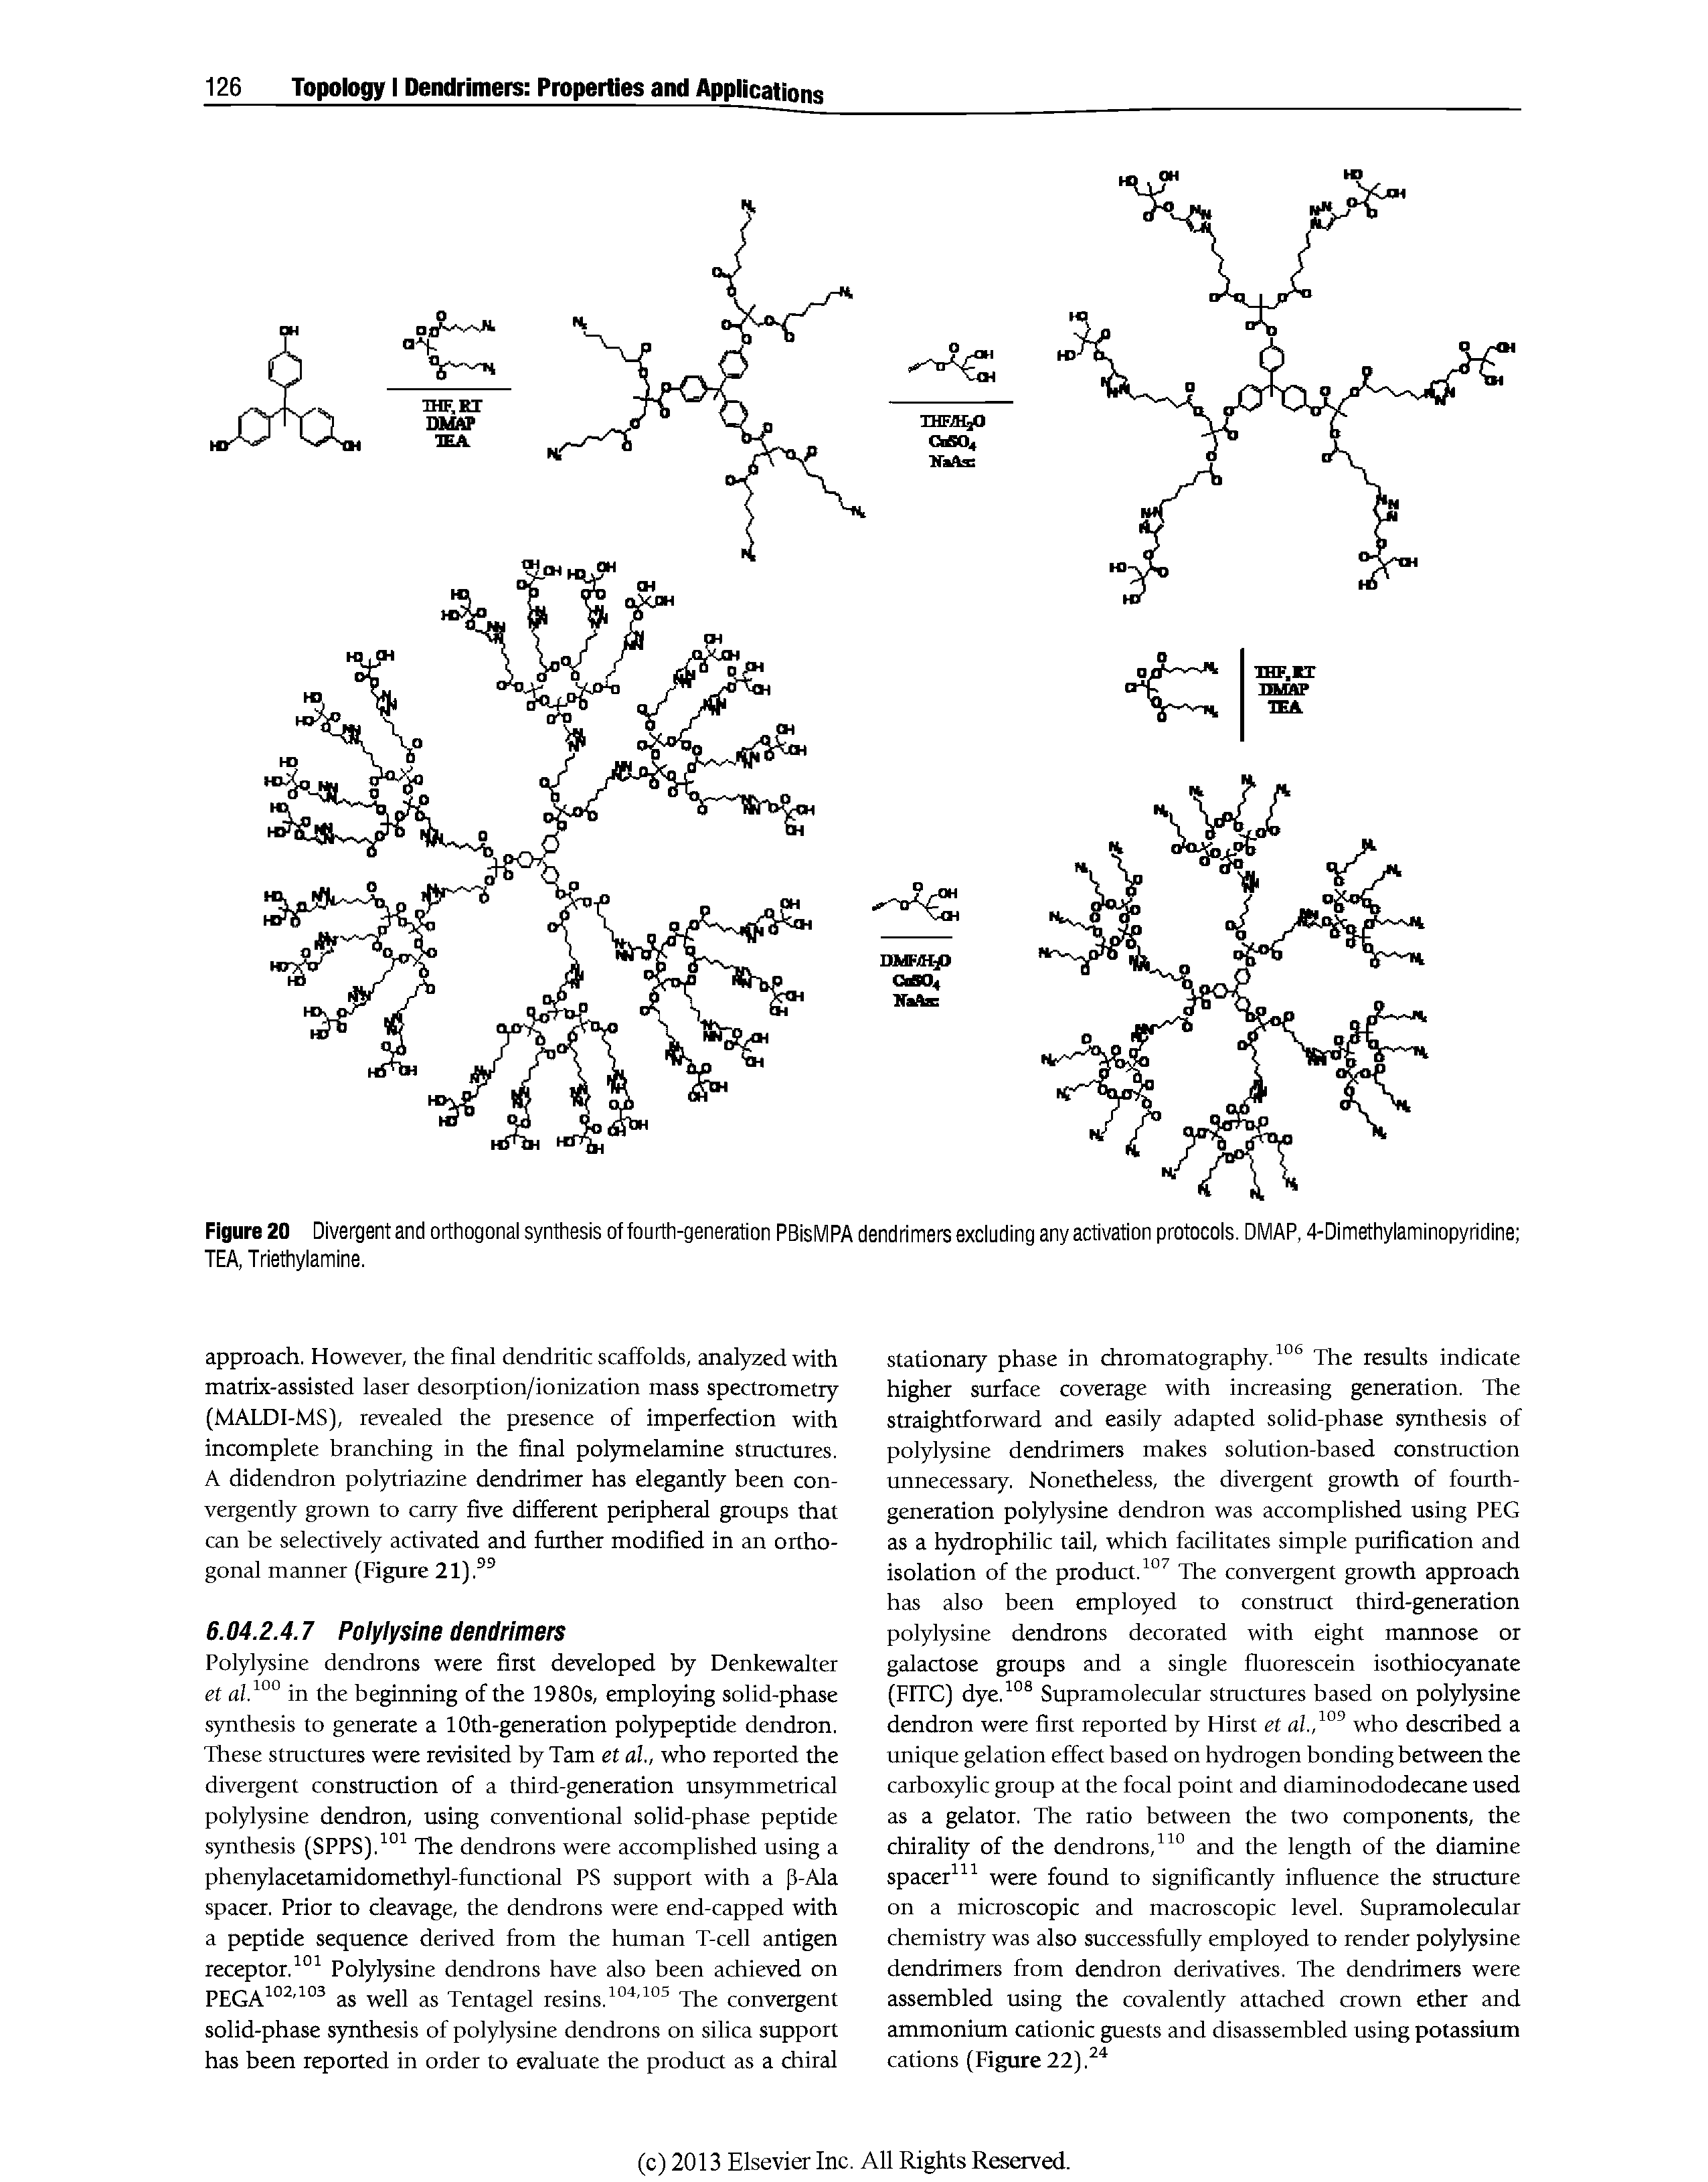 Figure 20 Divergent and orthogonal synthesis of fourth-generation PBisMPA dendrimers excluding any activation protocols. DMAP, 4-Dimethylaminopyridine TEA, Triethylamine.